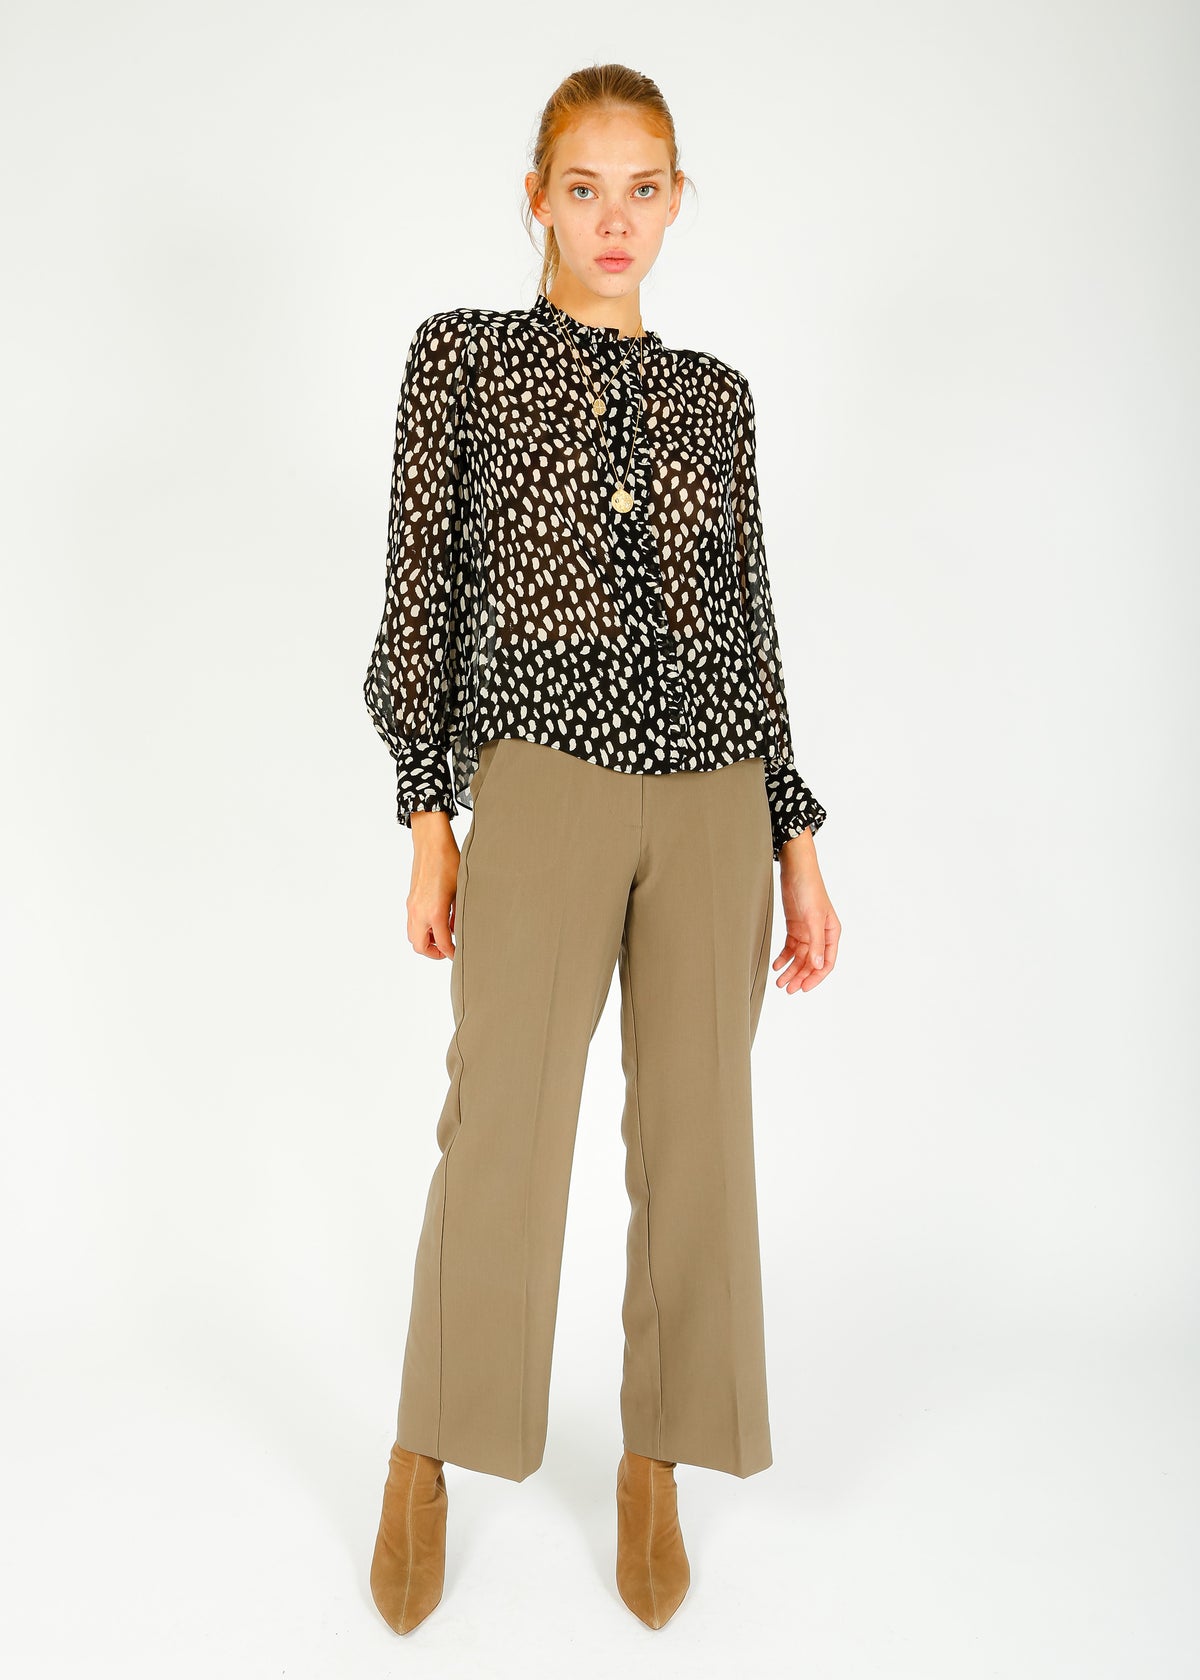 SEC.F Evie Trousers in Bungee Cord